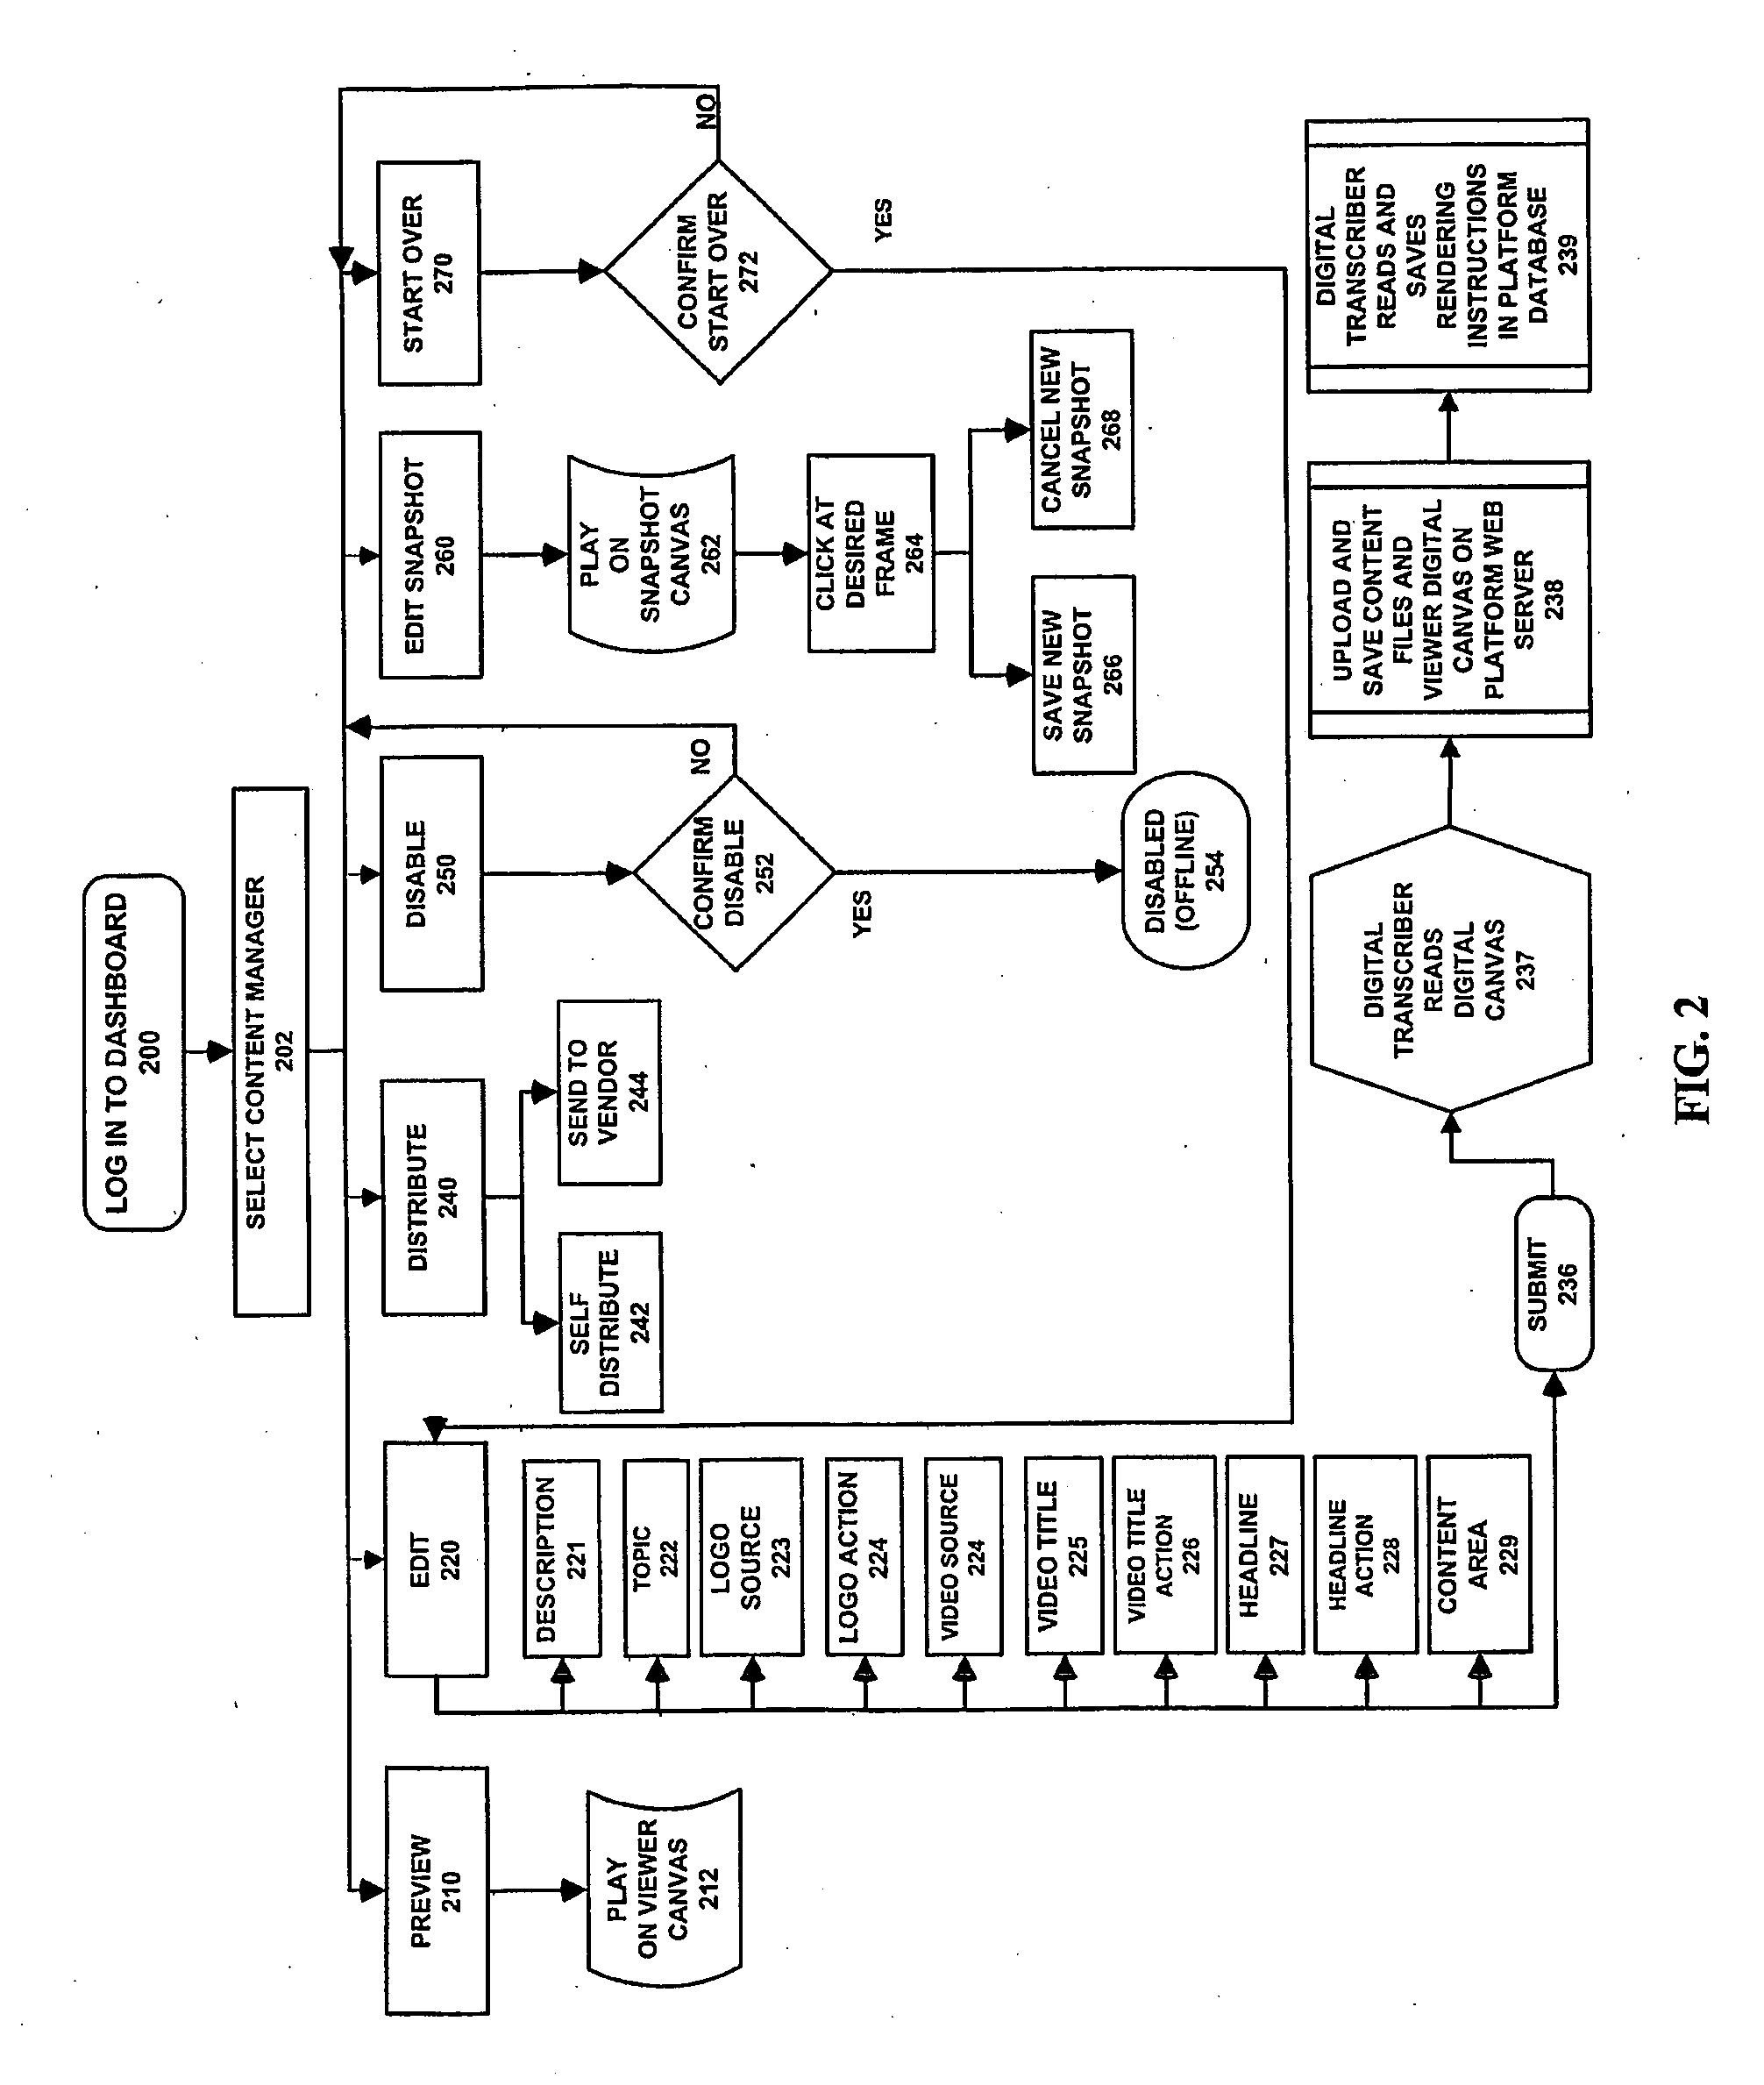 System and method for creating and tracking rich media communications